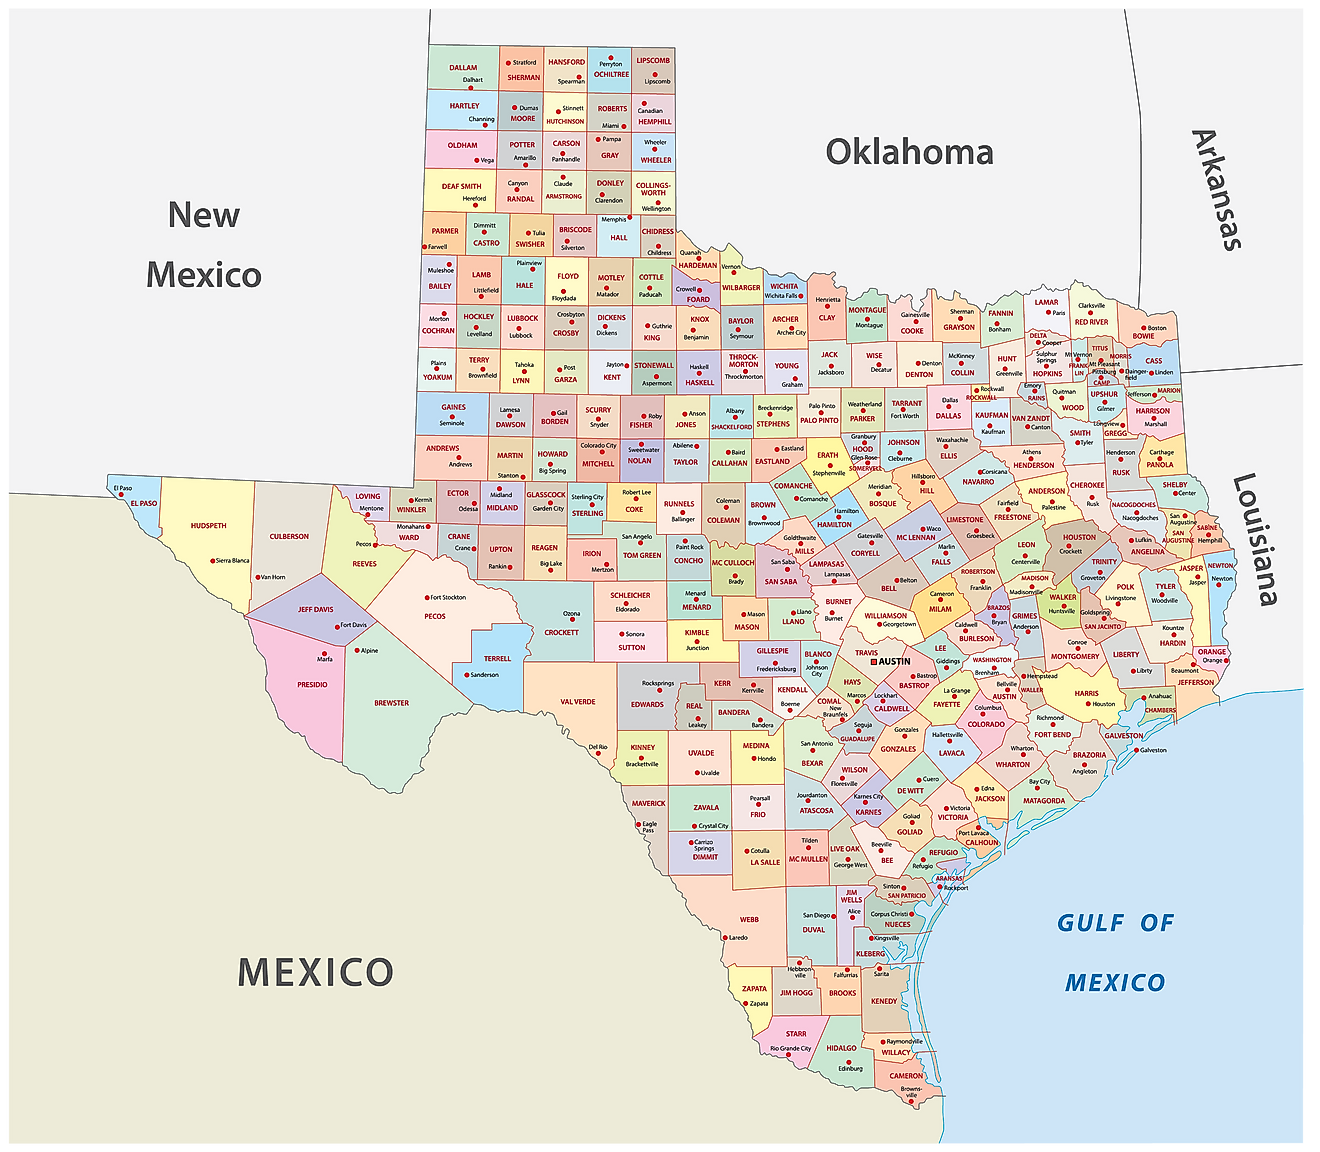 List of: All Counties in Texas